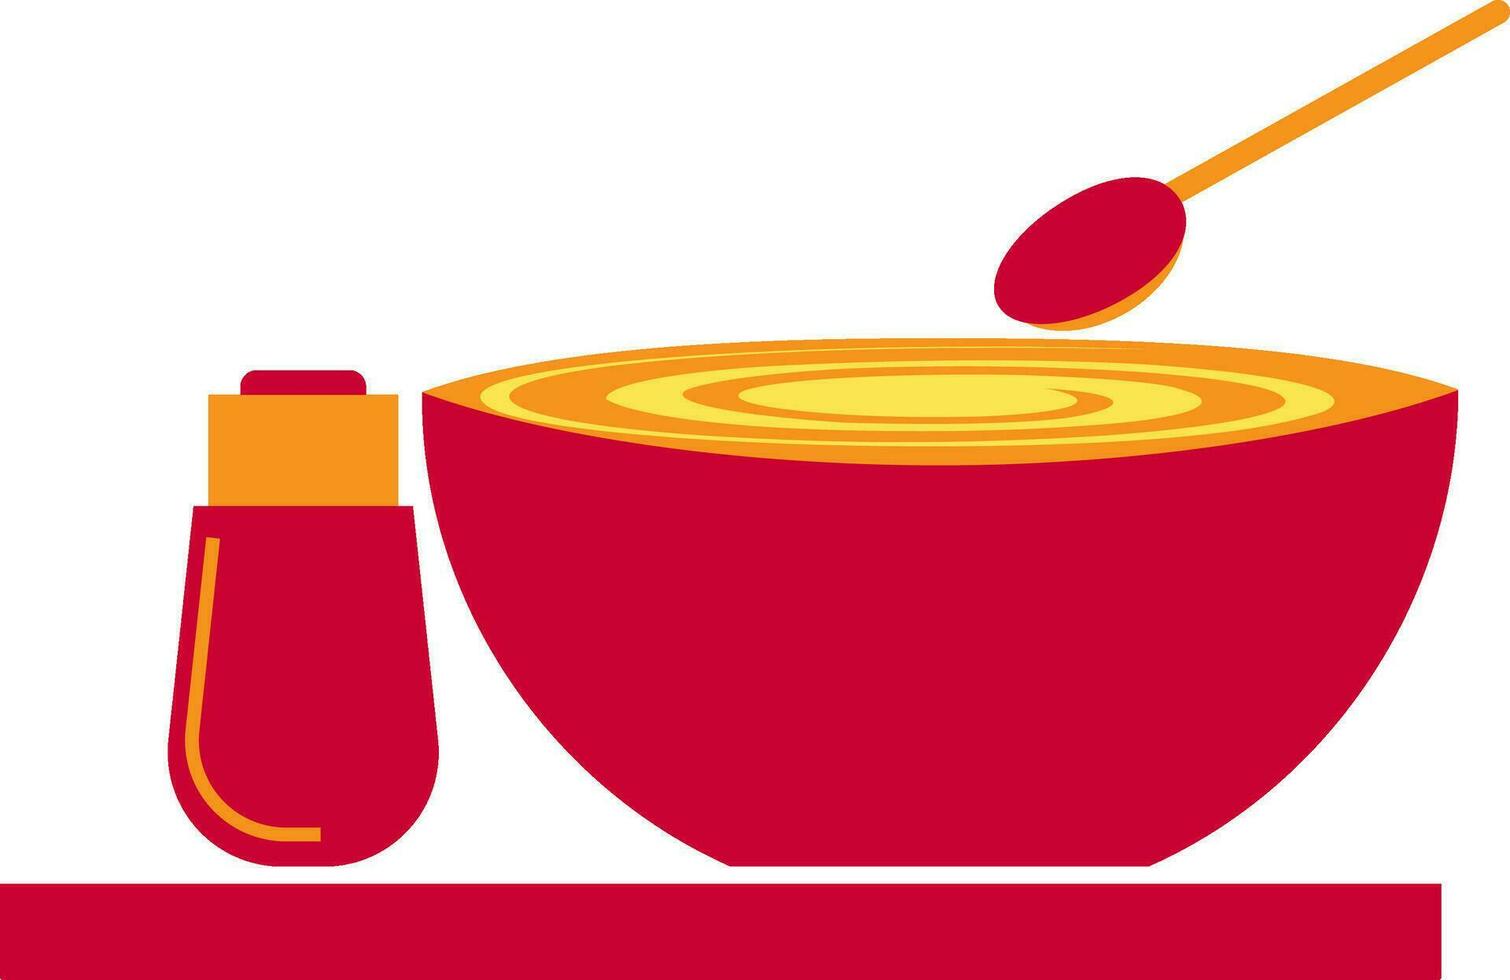 Red bowl with sprinkle bottle and spoon on tray. vector